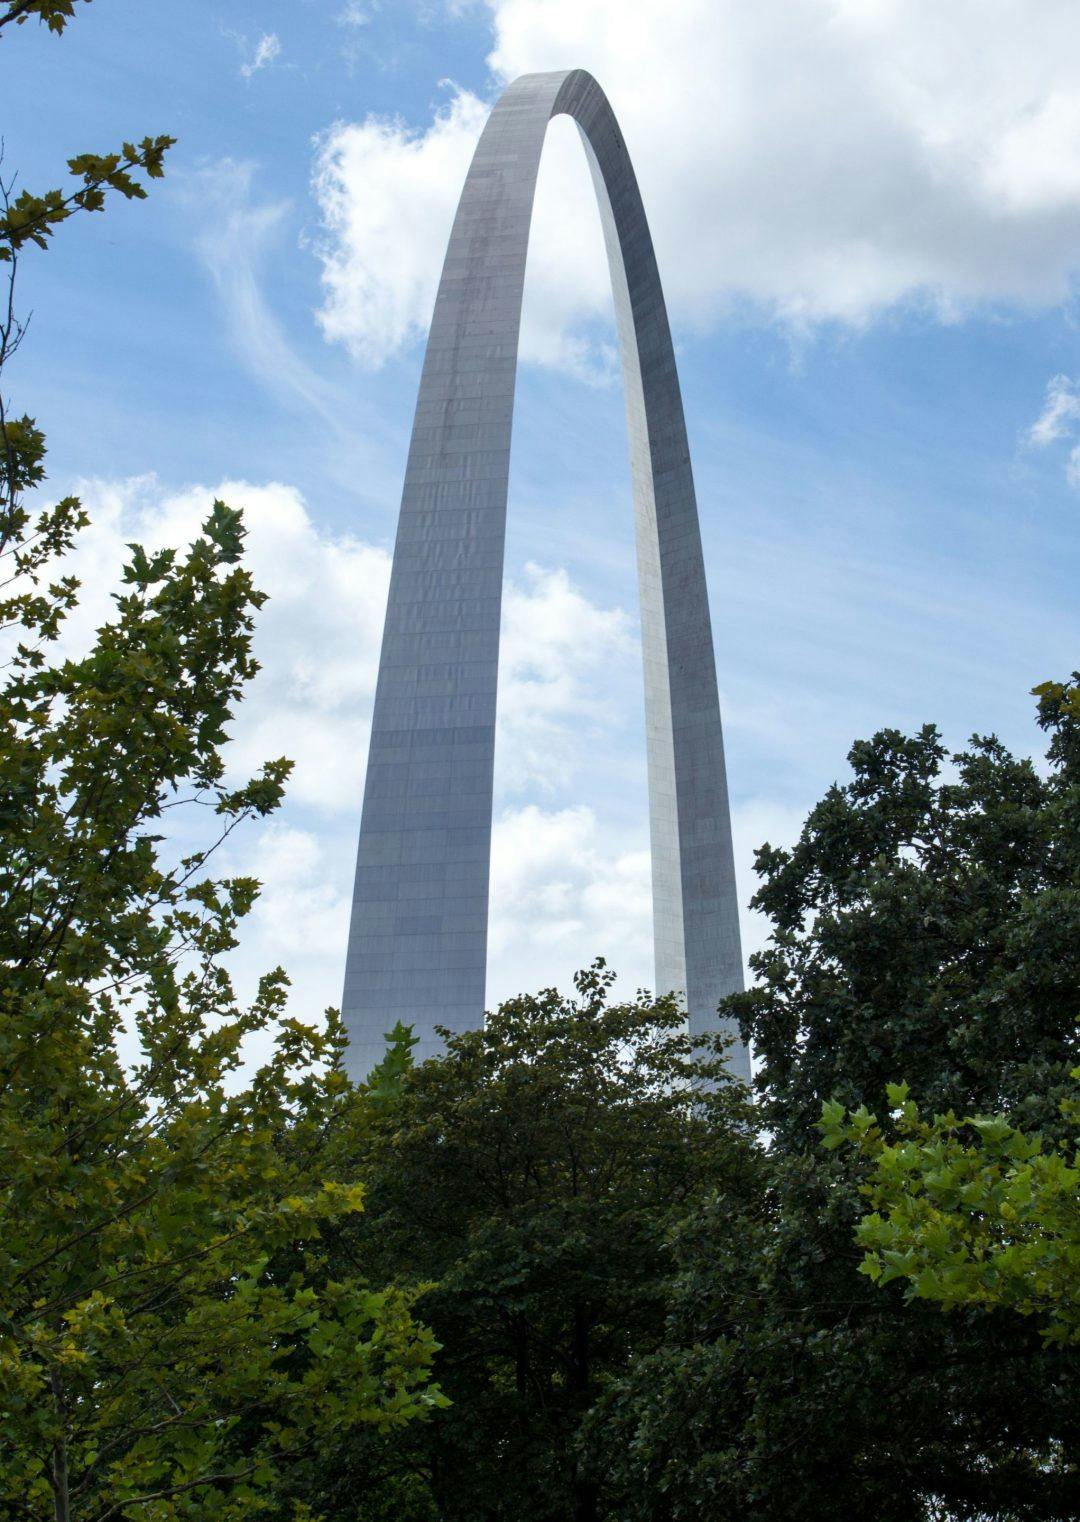 The Gateway Arch in St Louis